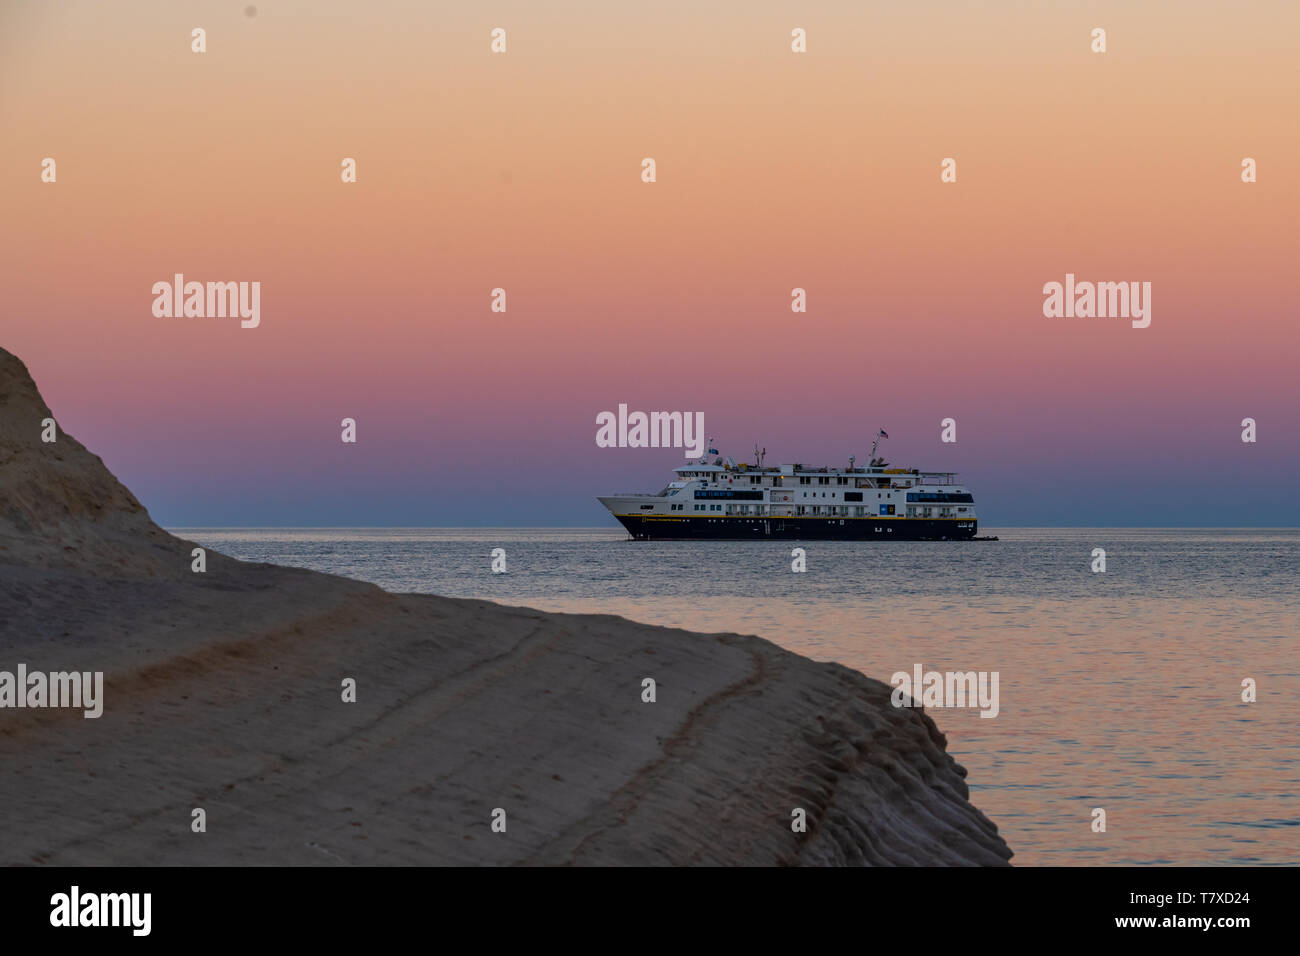 The Lindblad National Geographic Venture anchored at sunset off the shore of Isla San Jose, Baja California Sur, Mexico. Stock Photo